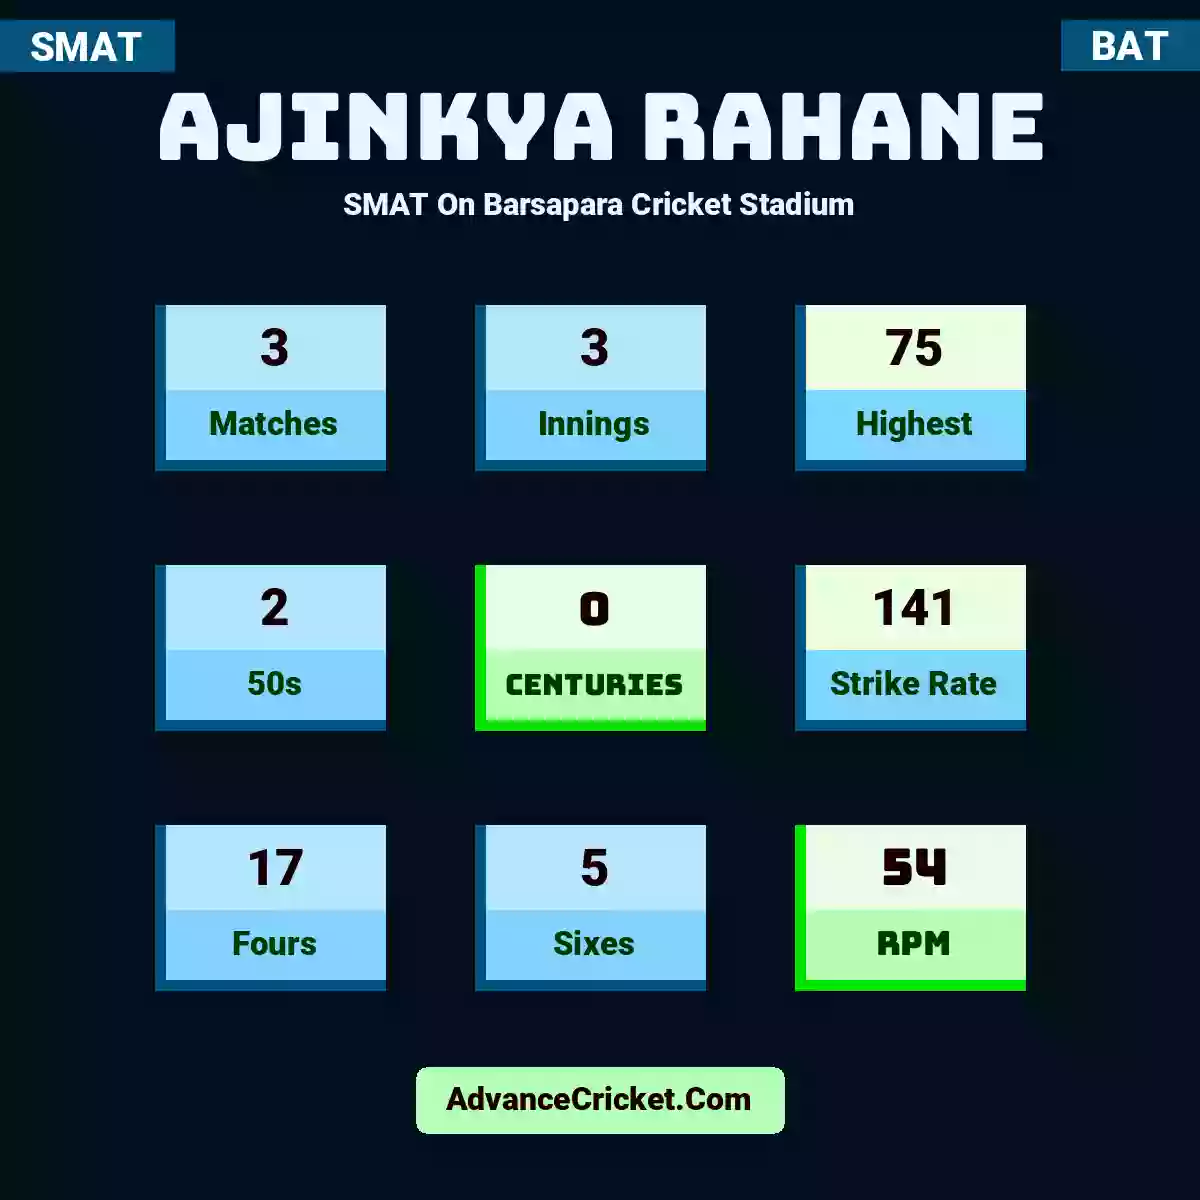 Ajinkya Rahane SMAT  On Barsapara Cricket Stadium, Ajinkya Rahane played 3 matches, scored 75 runs as highest, 2 half-centuries, and 0 centuries, with a strike rate of 141. A.Rahane hit 17 fours and 5 sixes, with an RPM of 54.